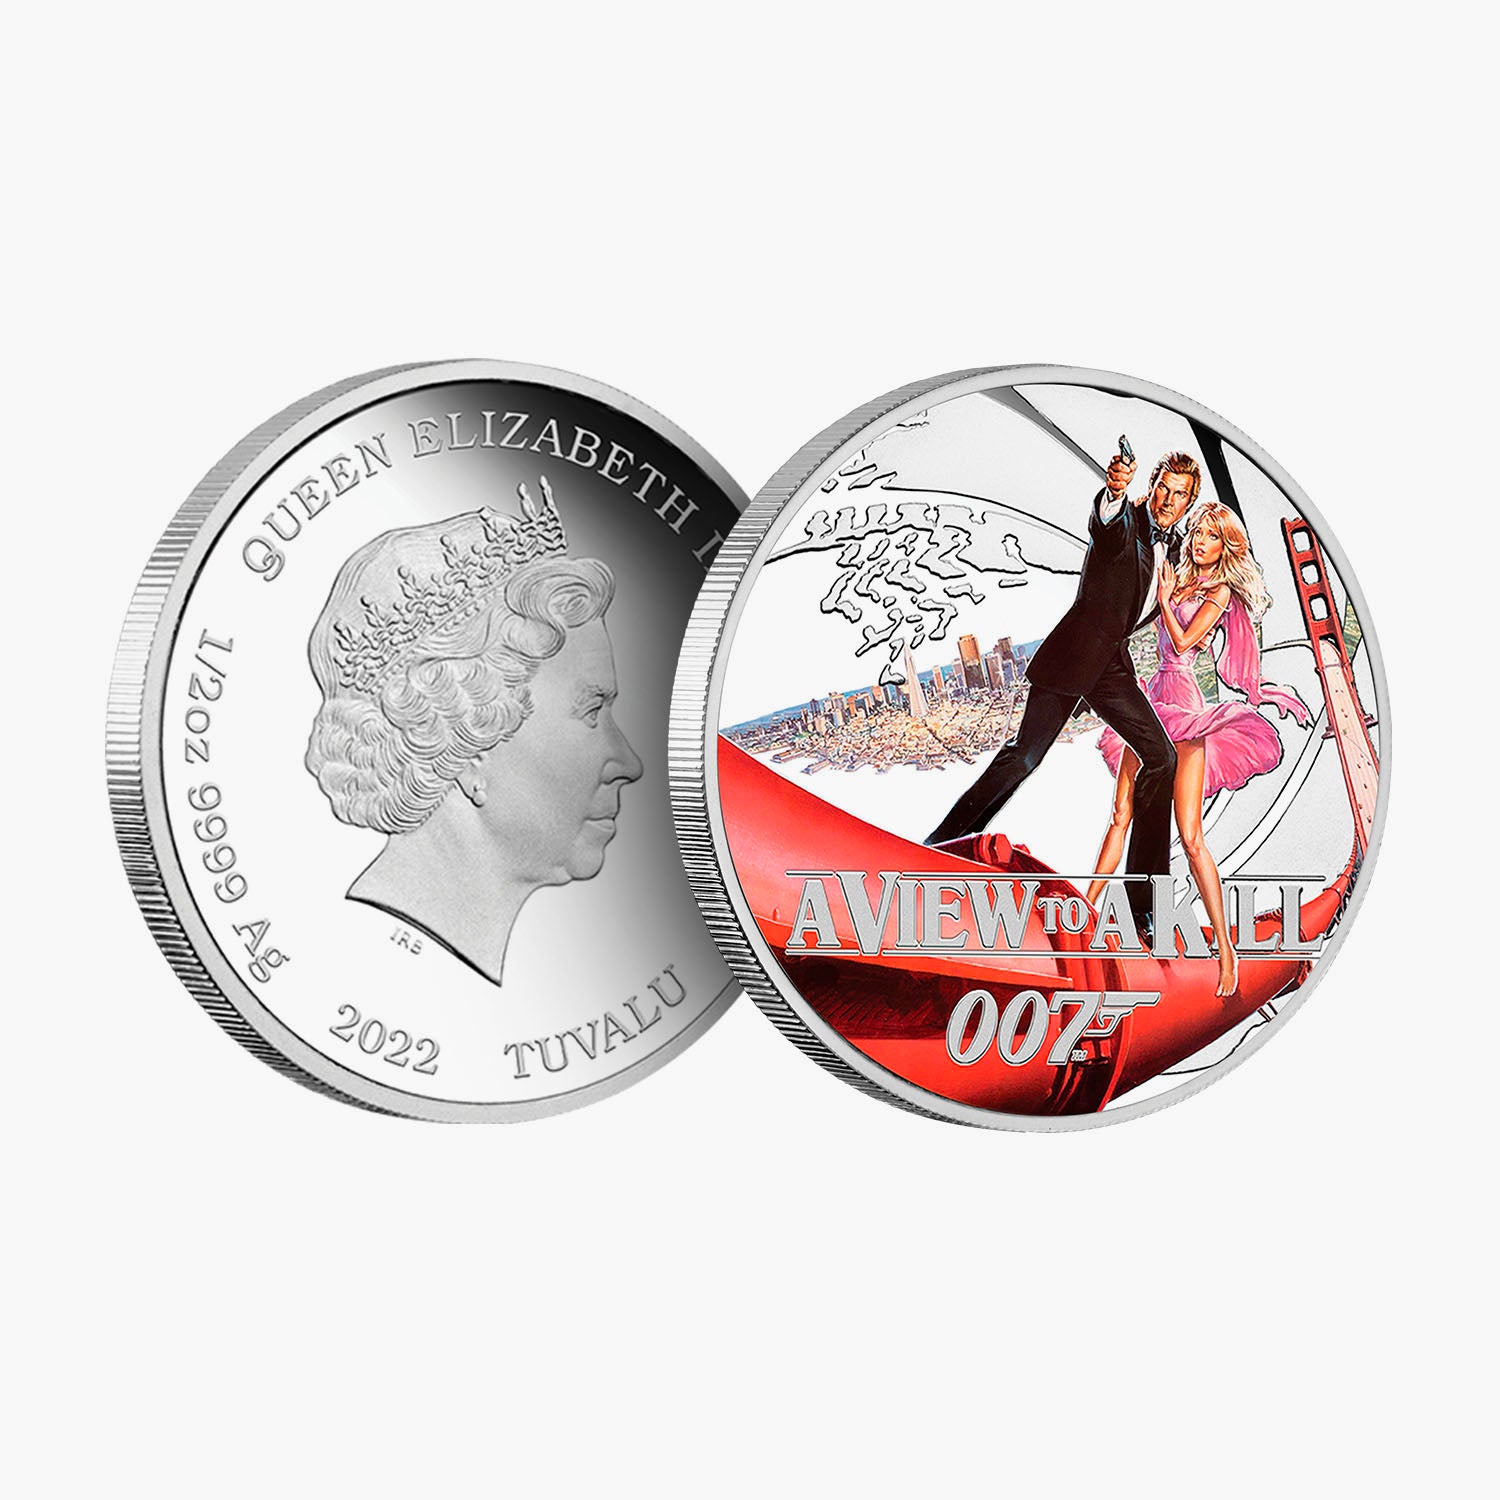 James Bond - A View to a Kill Solid Silver Movie Coin